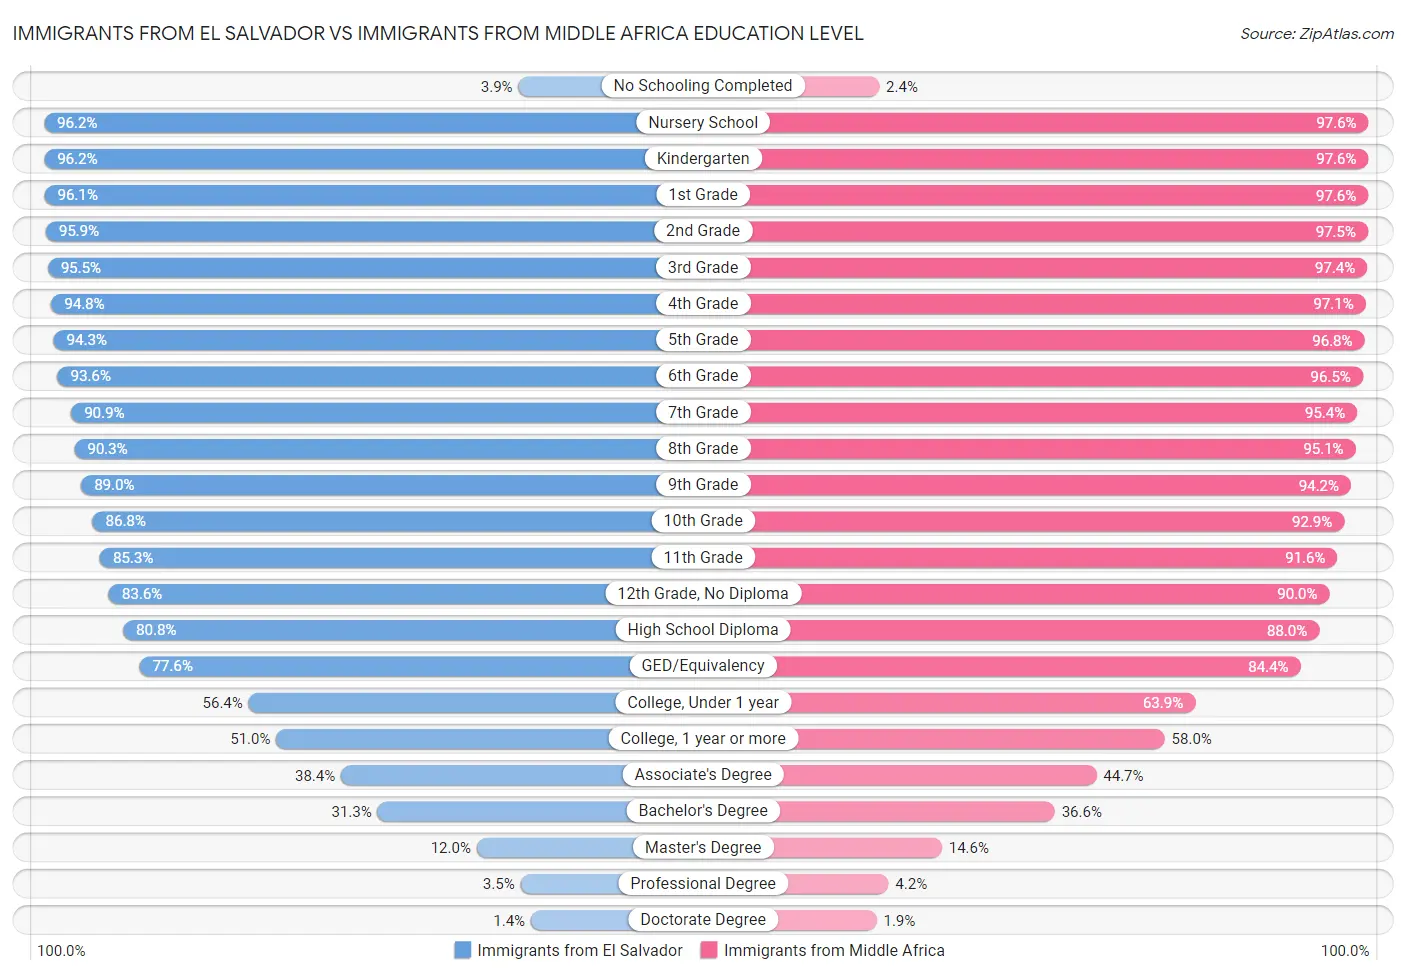 Immigrants from El Salvador vs Immigrants from Middle Africa Education Level